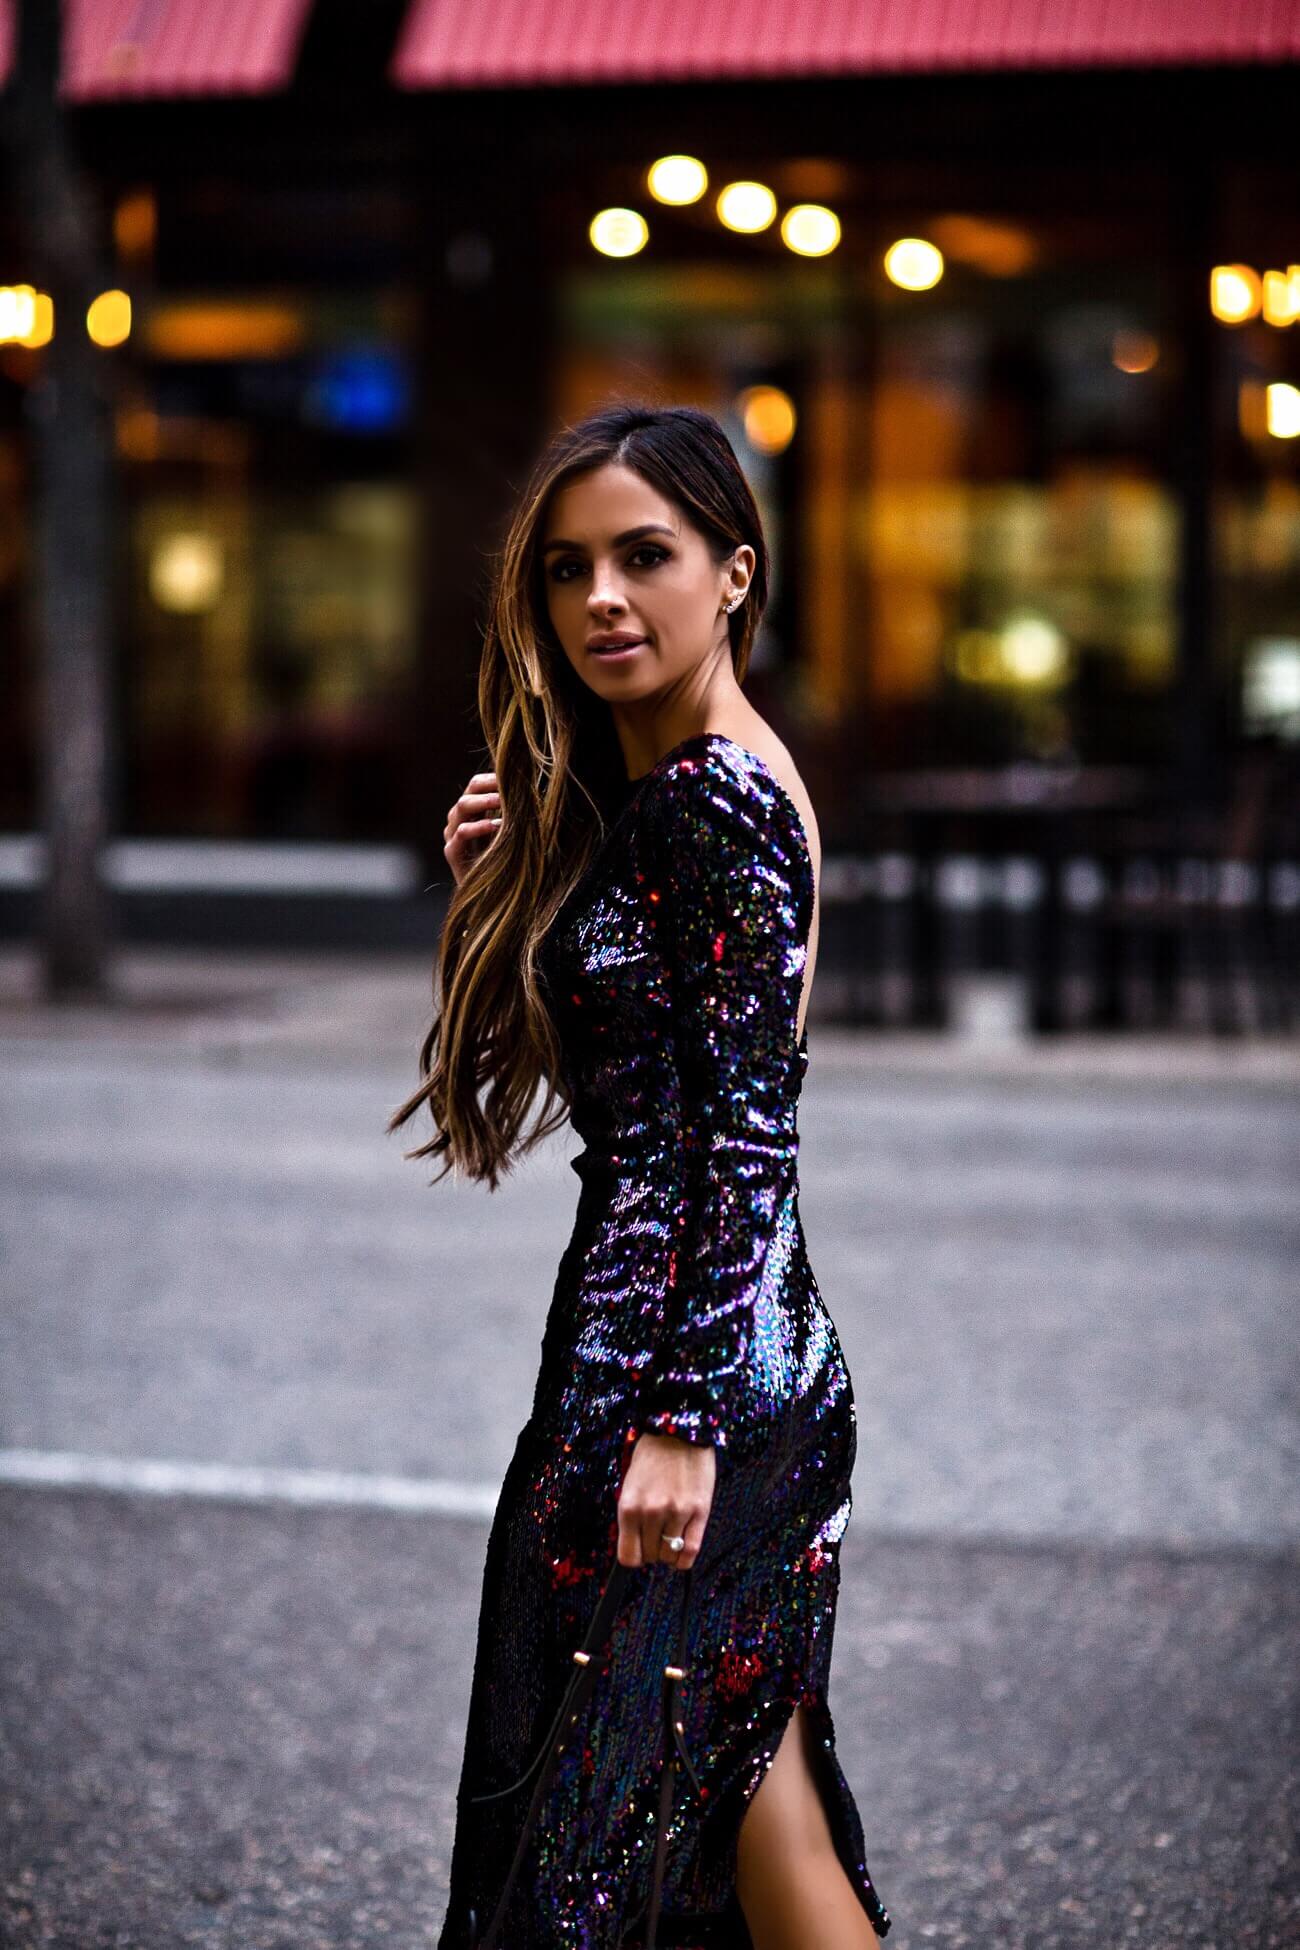 Holiday Dresses That Make A Statement ...